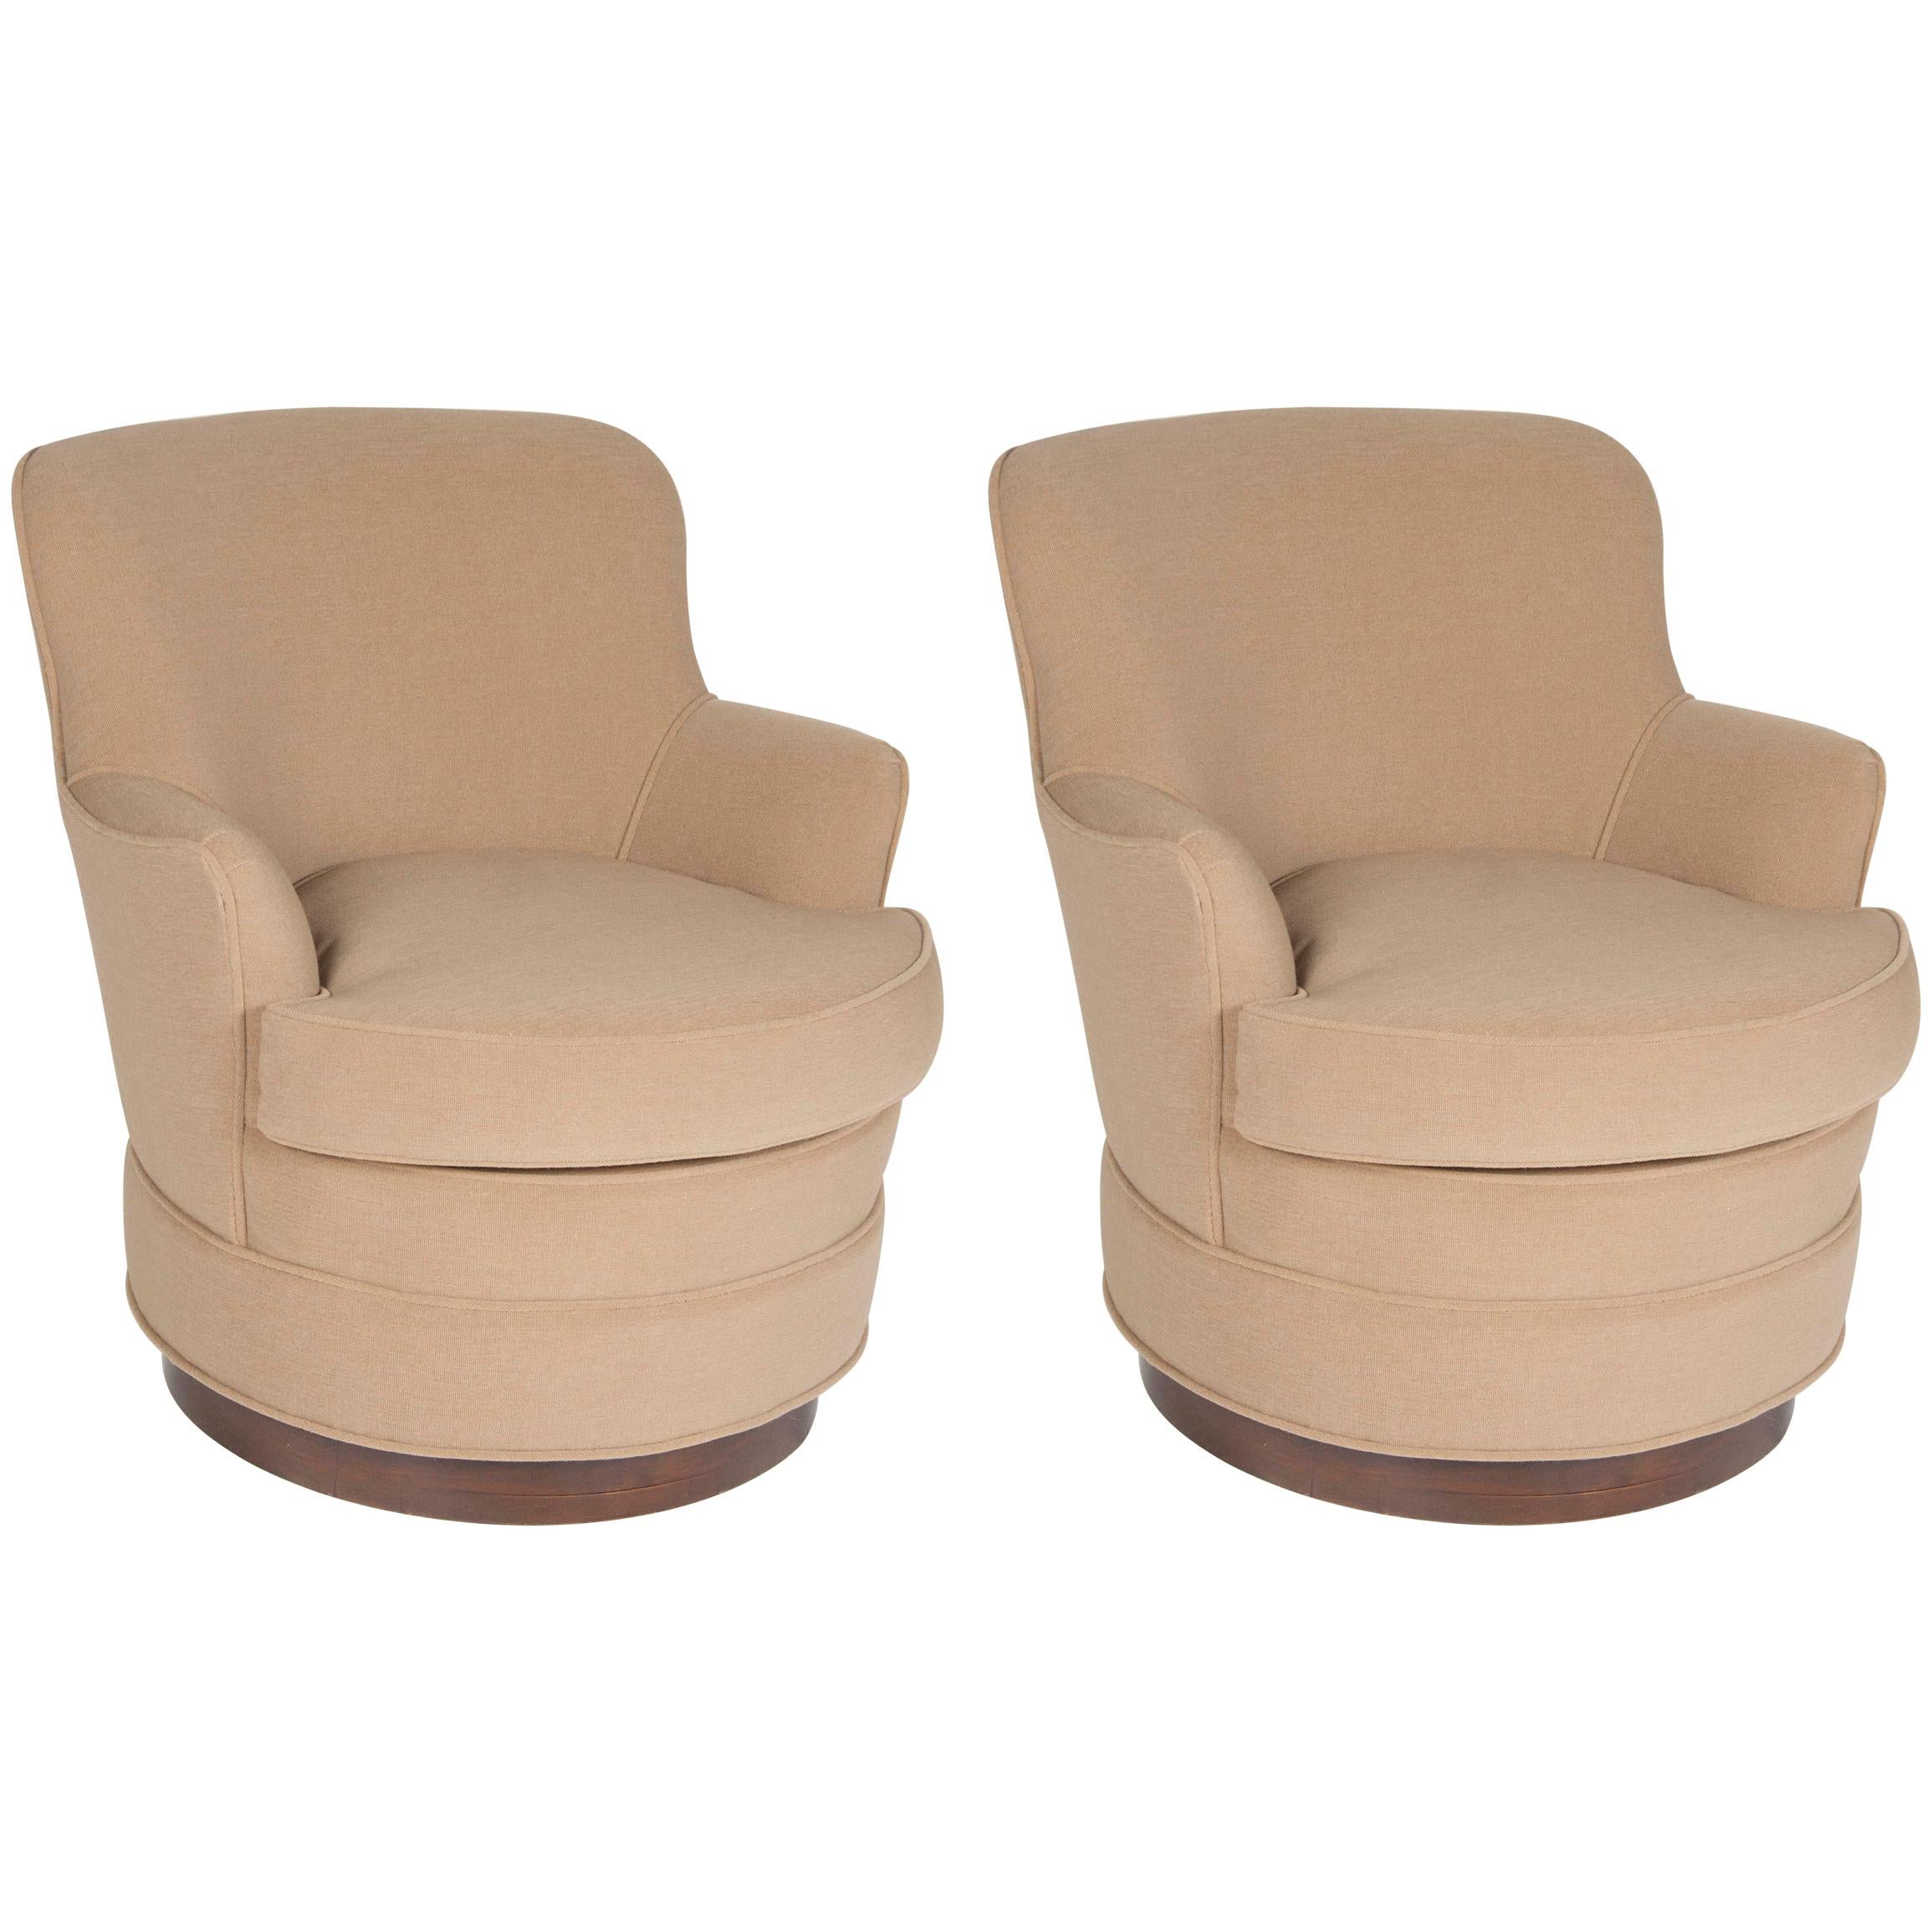 Pair of Mid-Century Modern Swivel Tele-Chairs by Harvey Probber